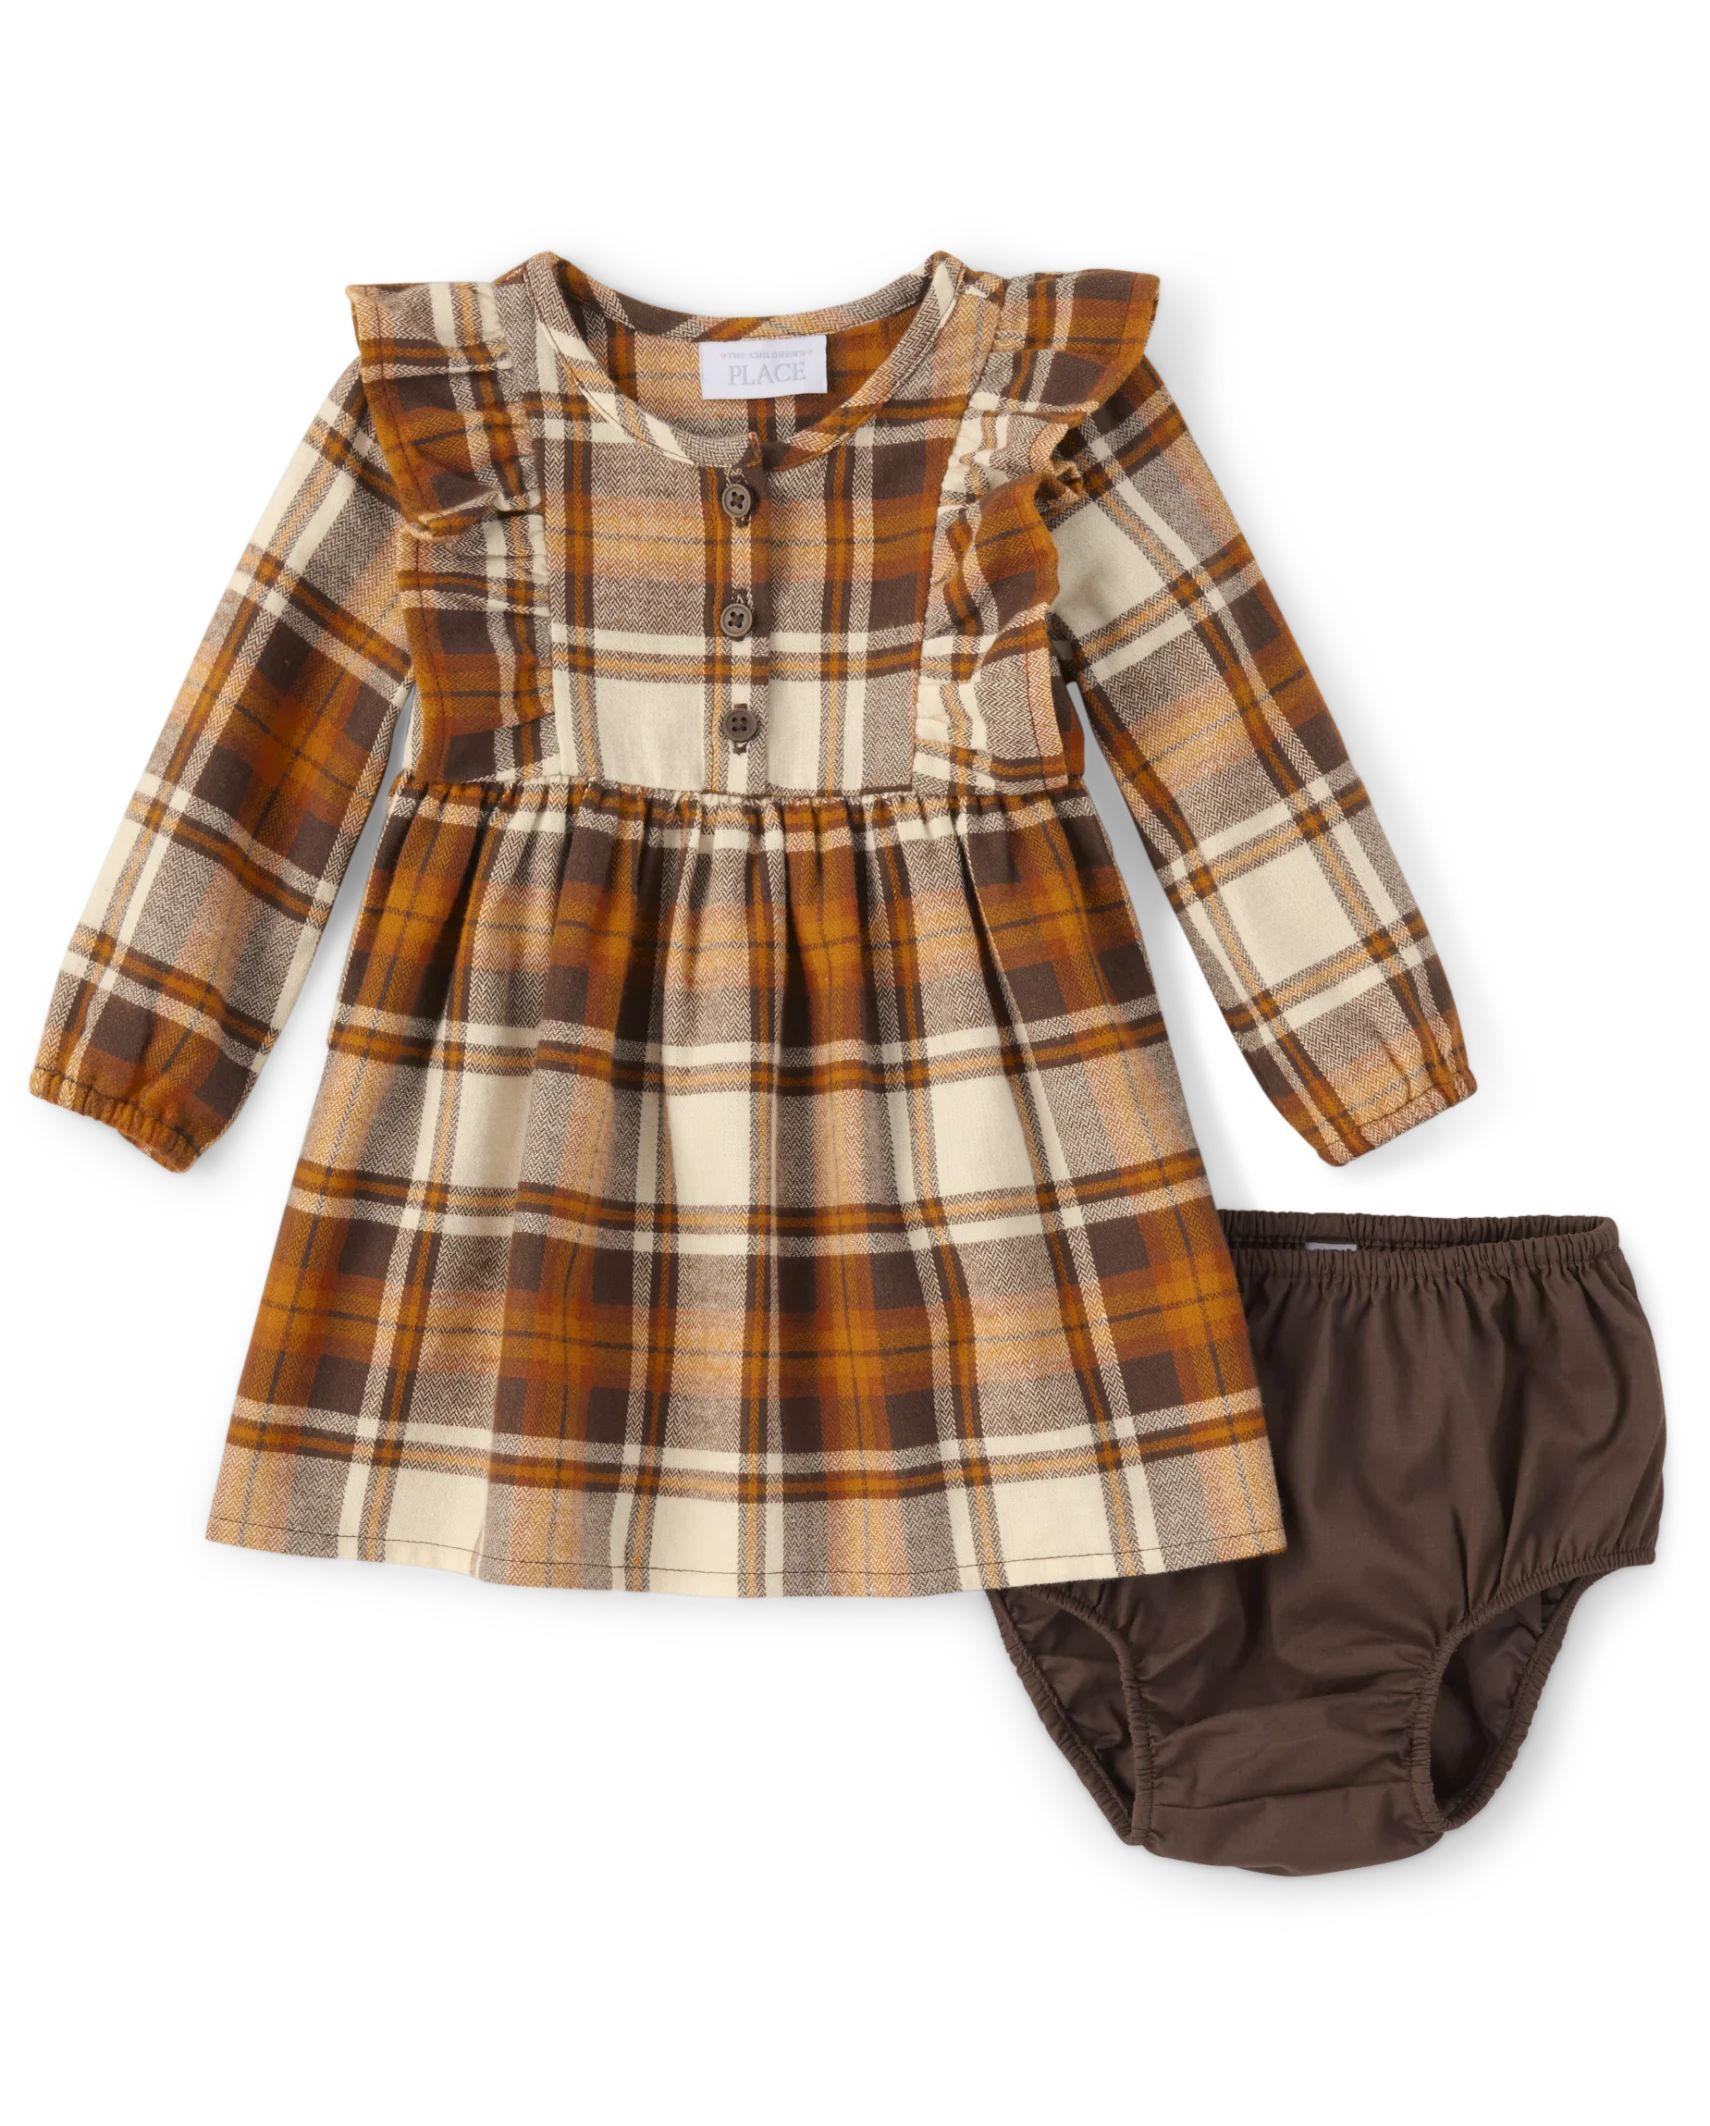 Baby Girls Matching Family Plaid Flannel Shirt Dress - hay stack | The Children's Place